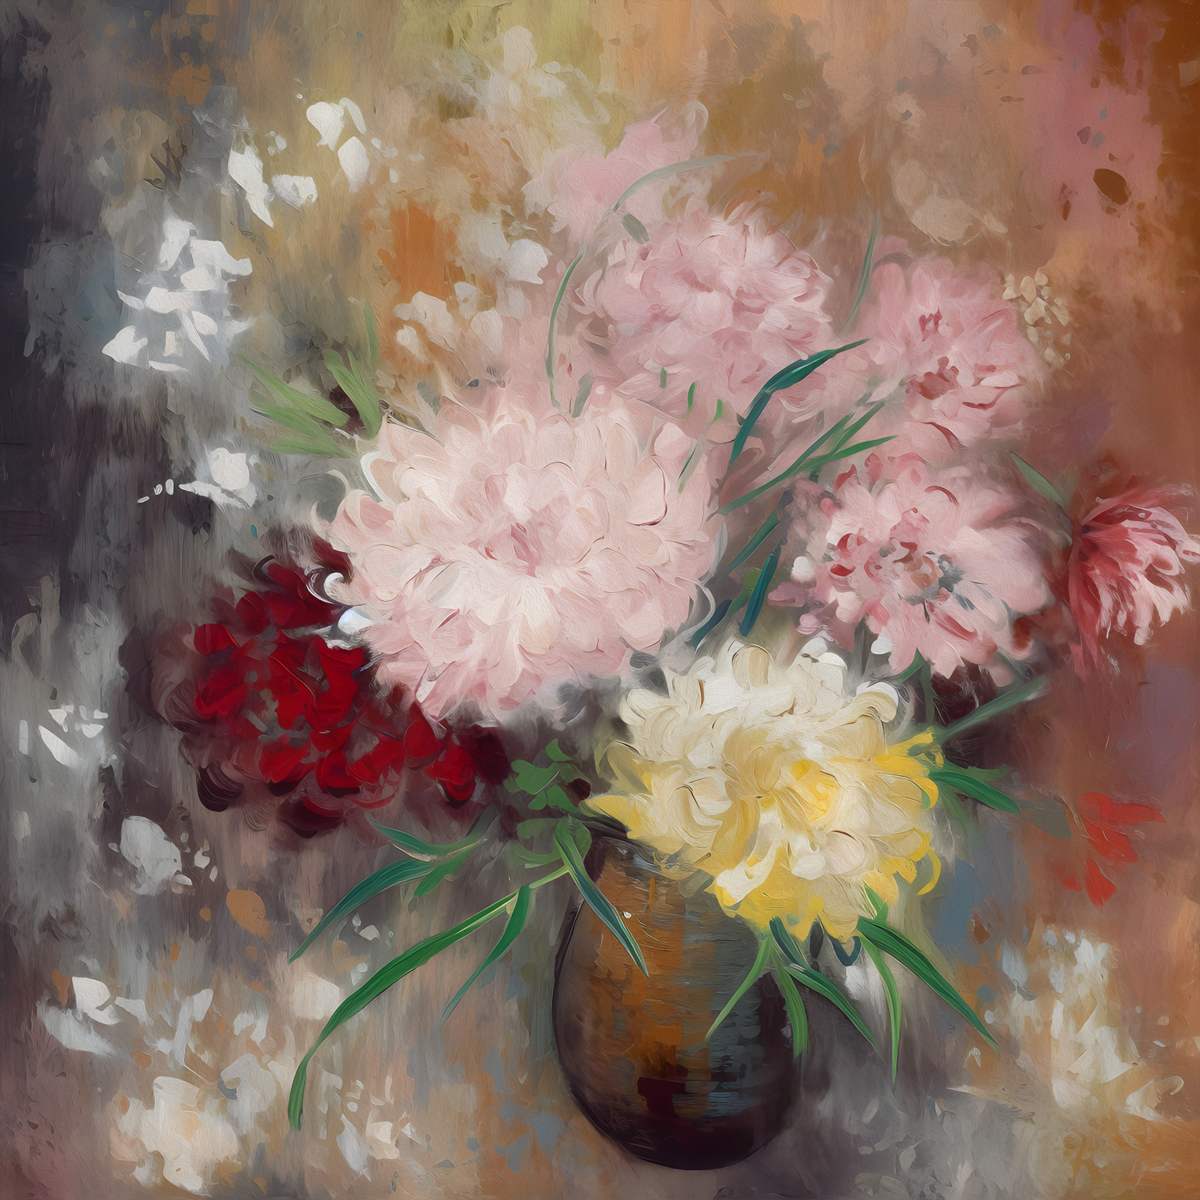  Ethereal Beauty: 'Pink Blossoms' Art Collection - Art Print on Canvas. Artemyst